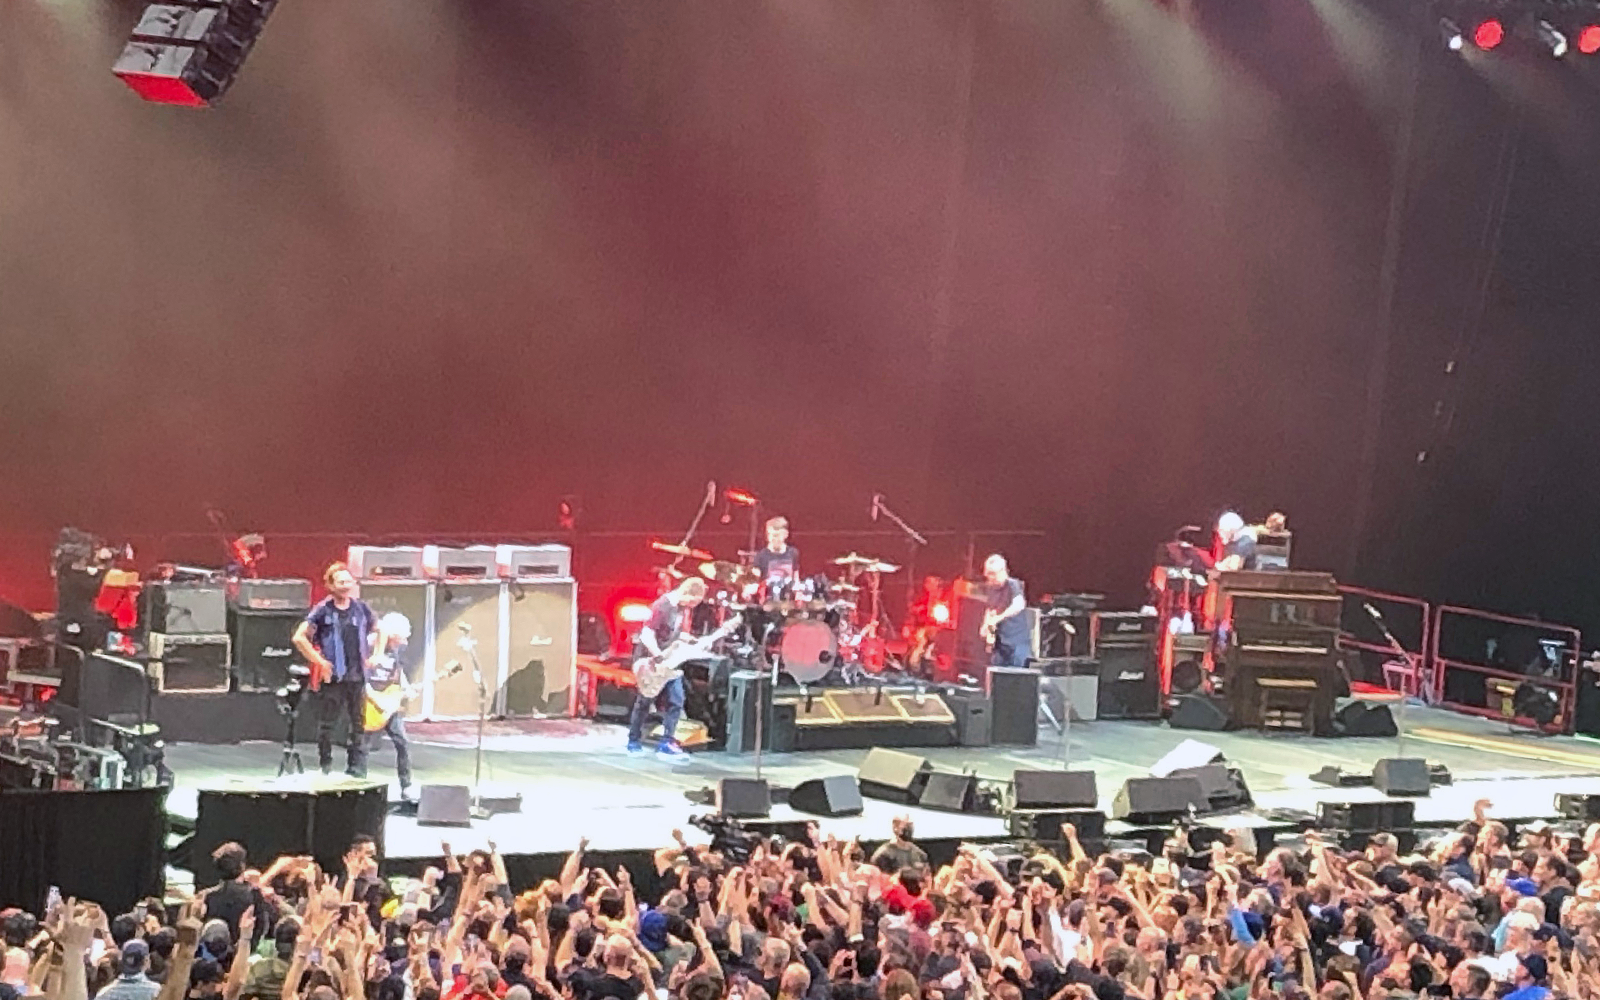 Pearl Jam on stage in Québec City